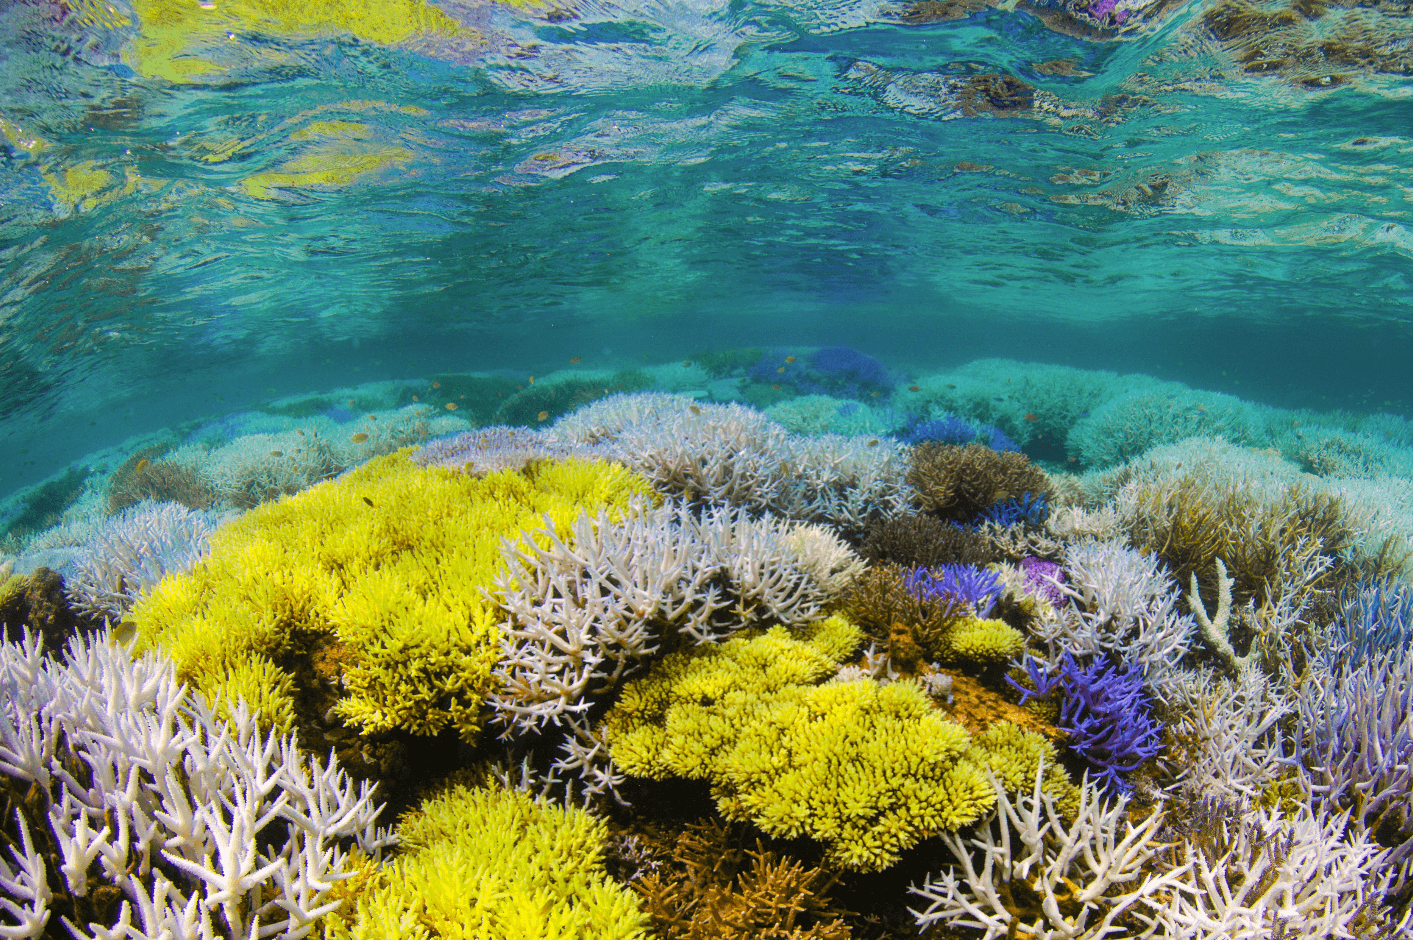 Corals worldwide are suffering from a number of stressors and in some places reefs have flashed vibrant colors as a result.